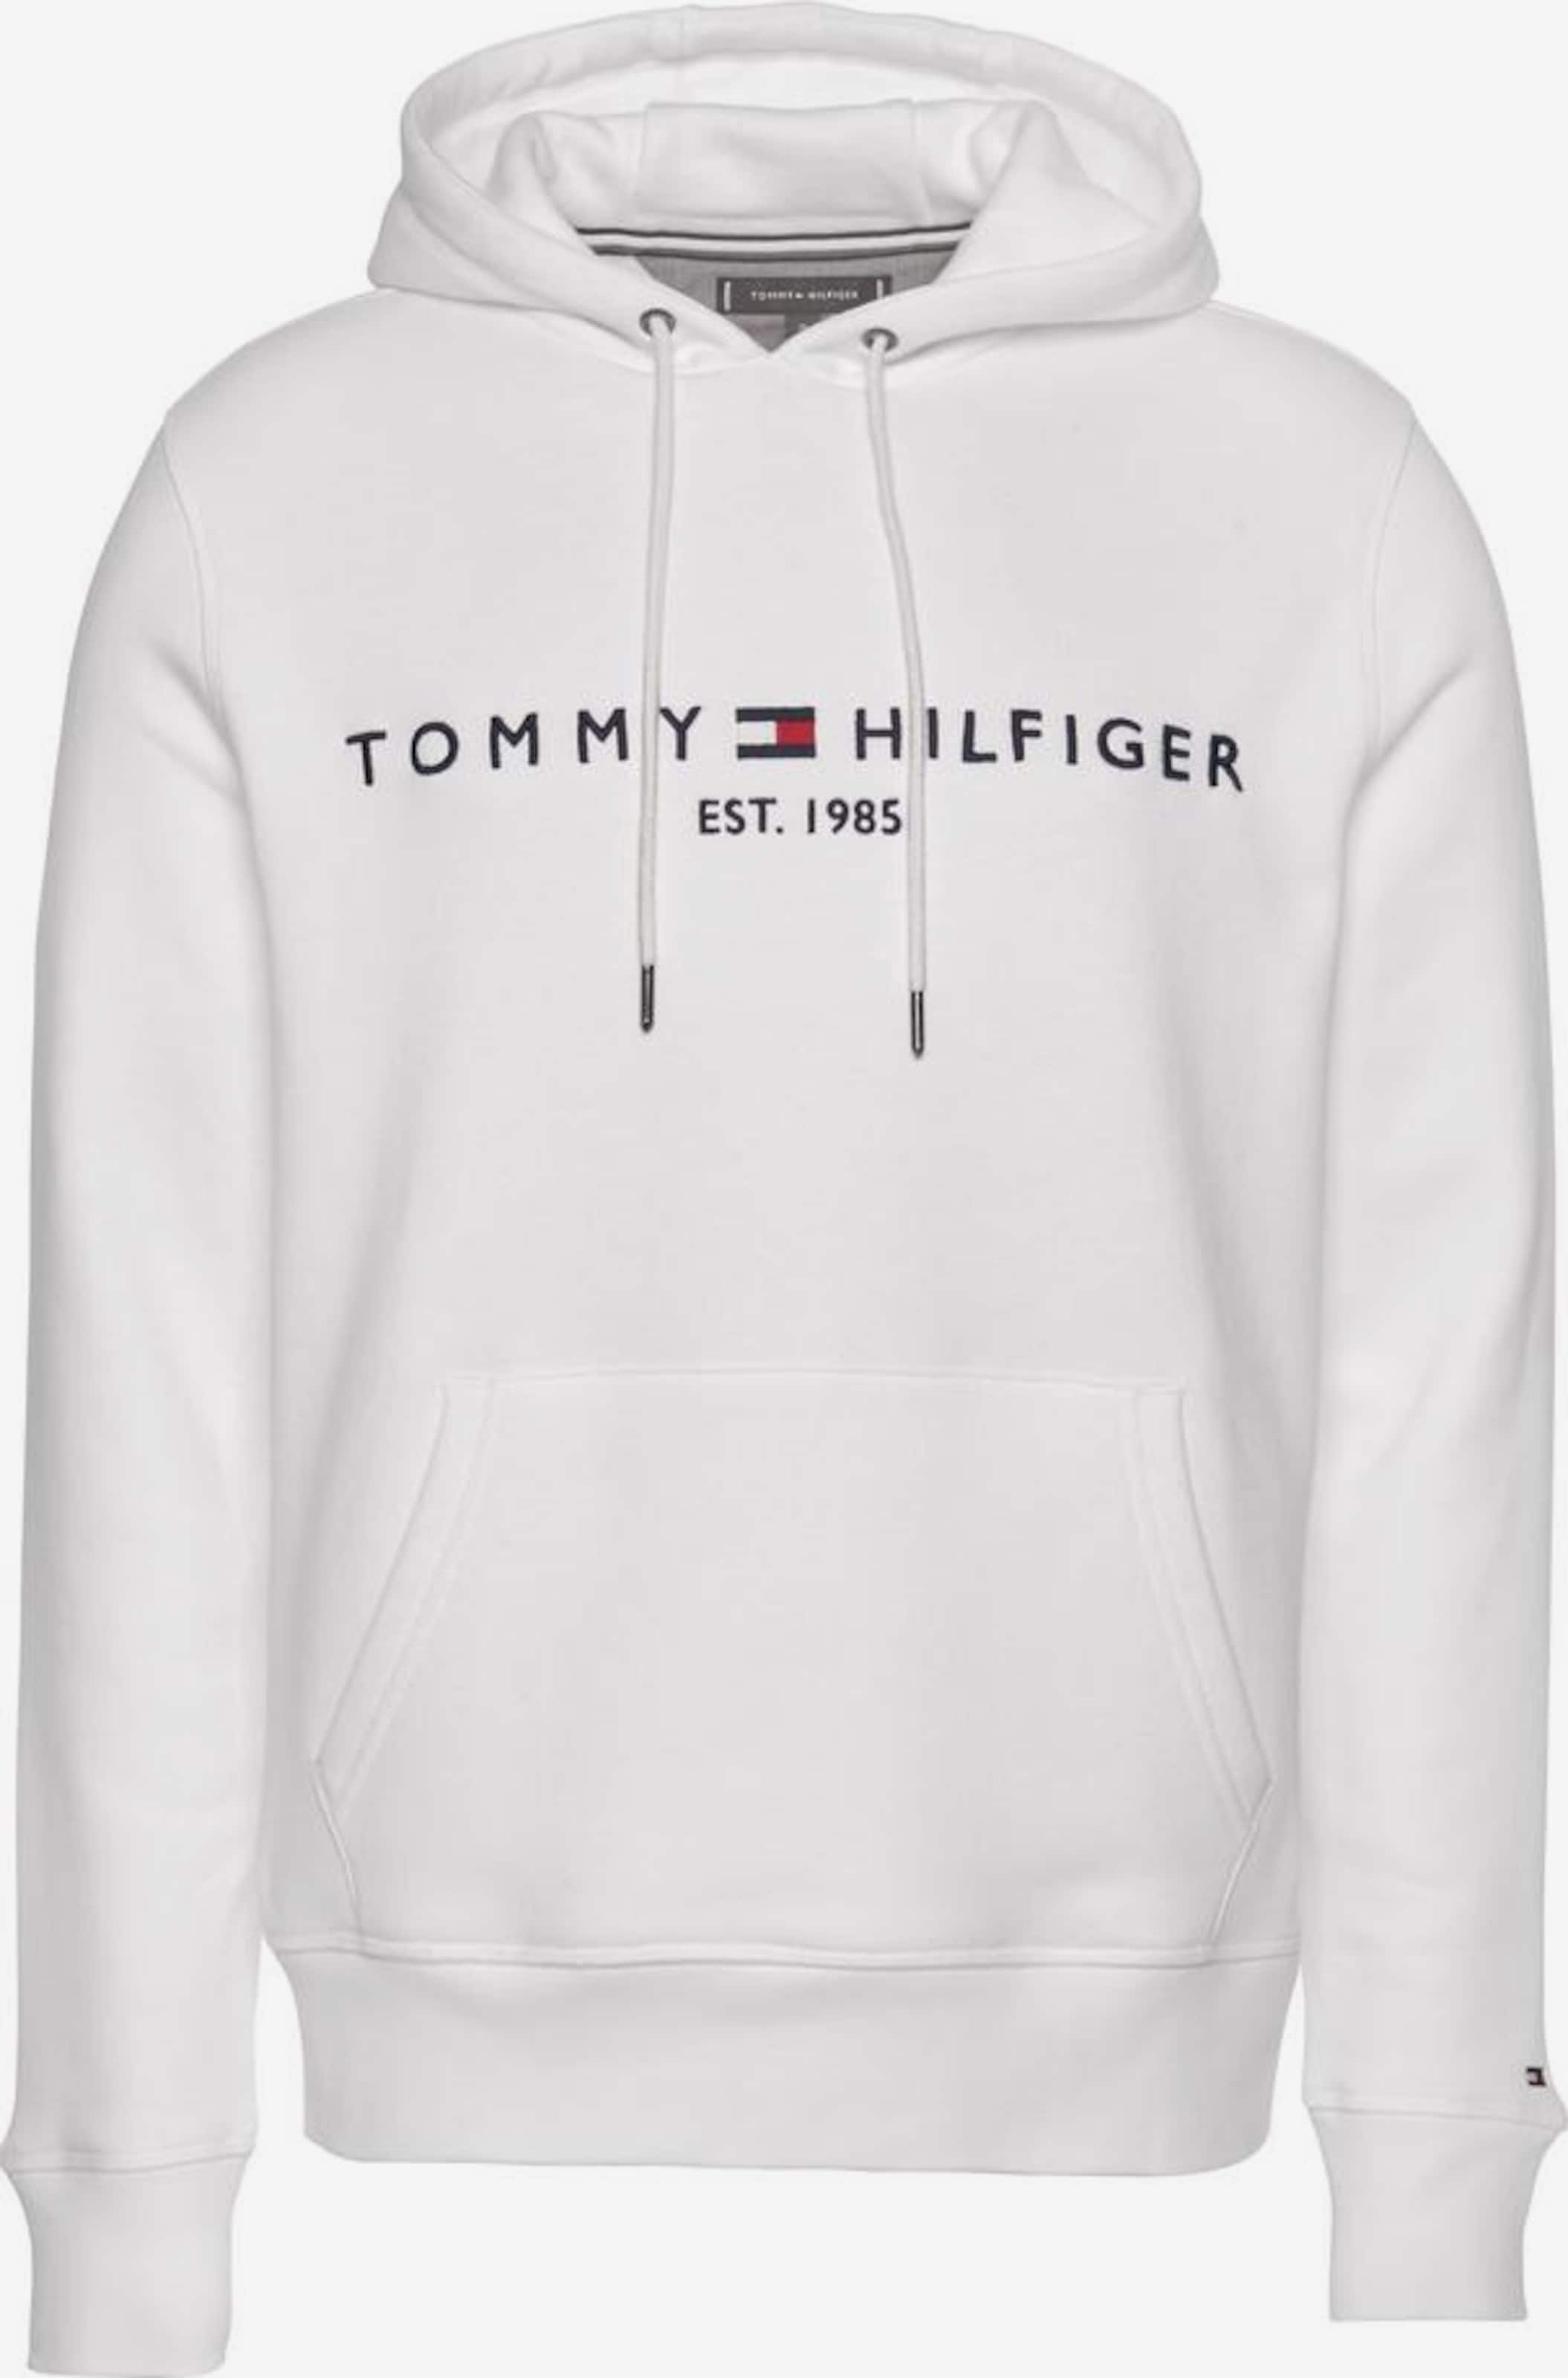 HILFIGER Regular fit in | ABOUT YOU